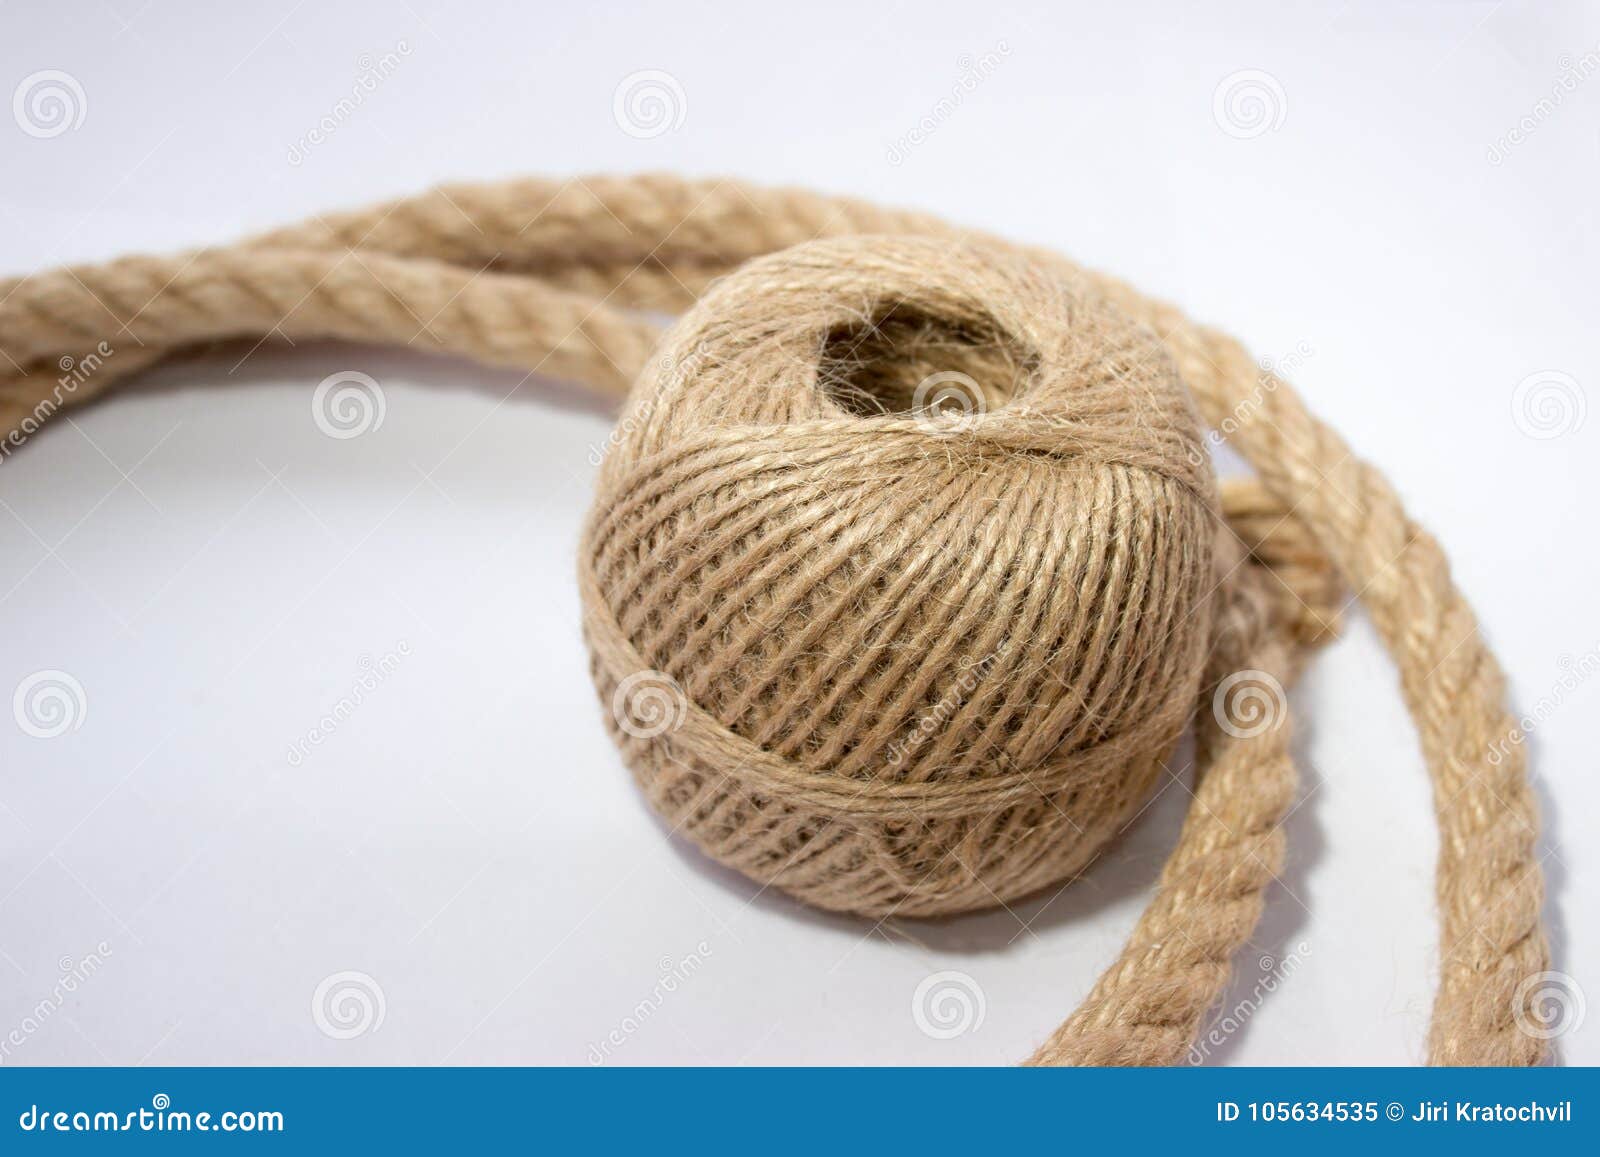 Thin Twine Tangled in a Ball Stock Image - Image of piece, line